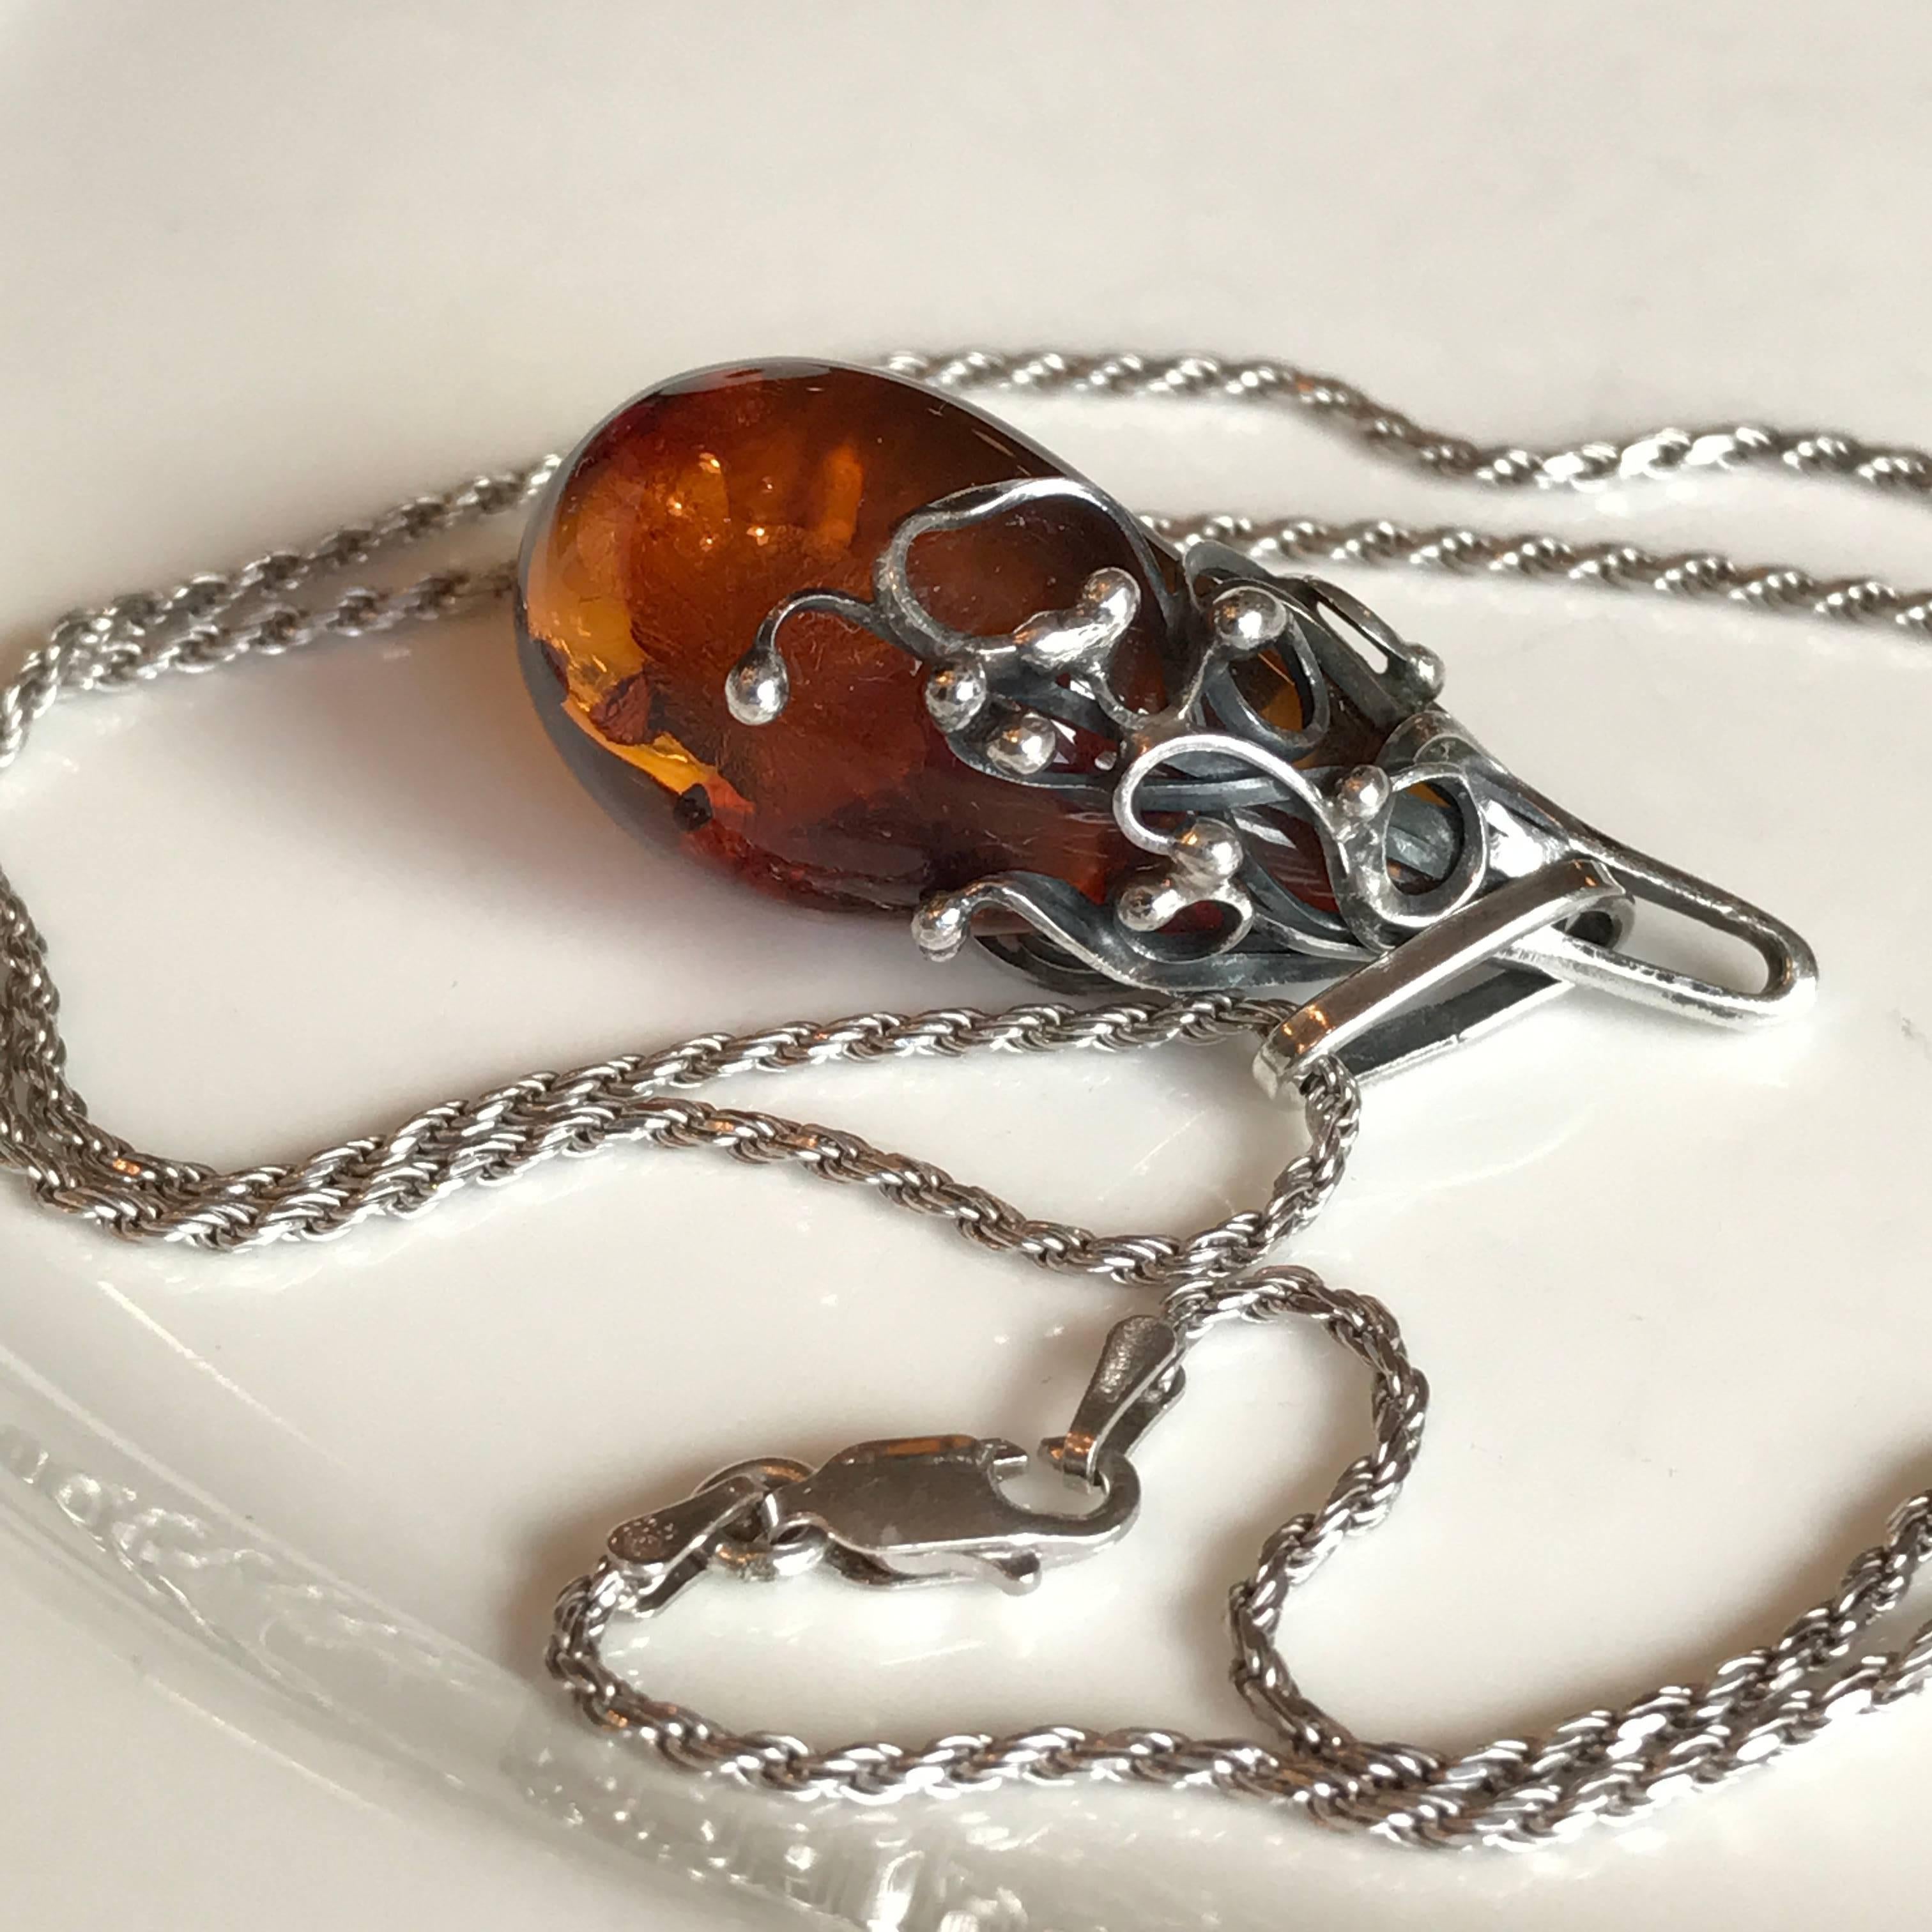 20th Century Scandinavian Amber Pendant and Sterling Silver Necklace